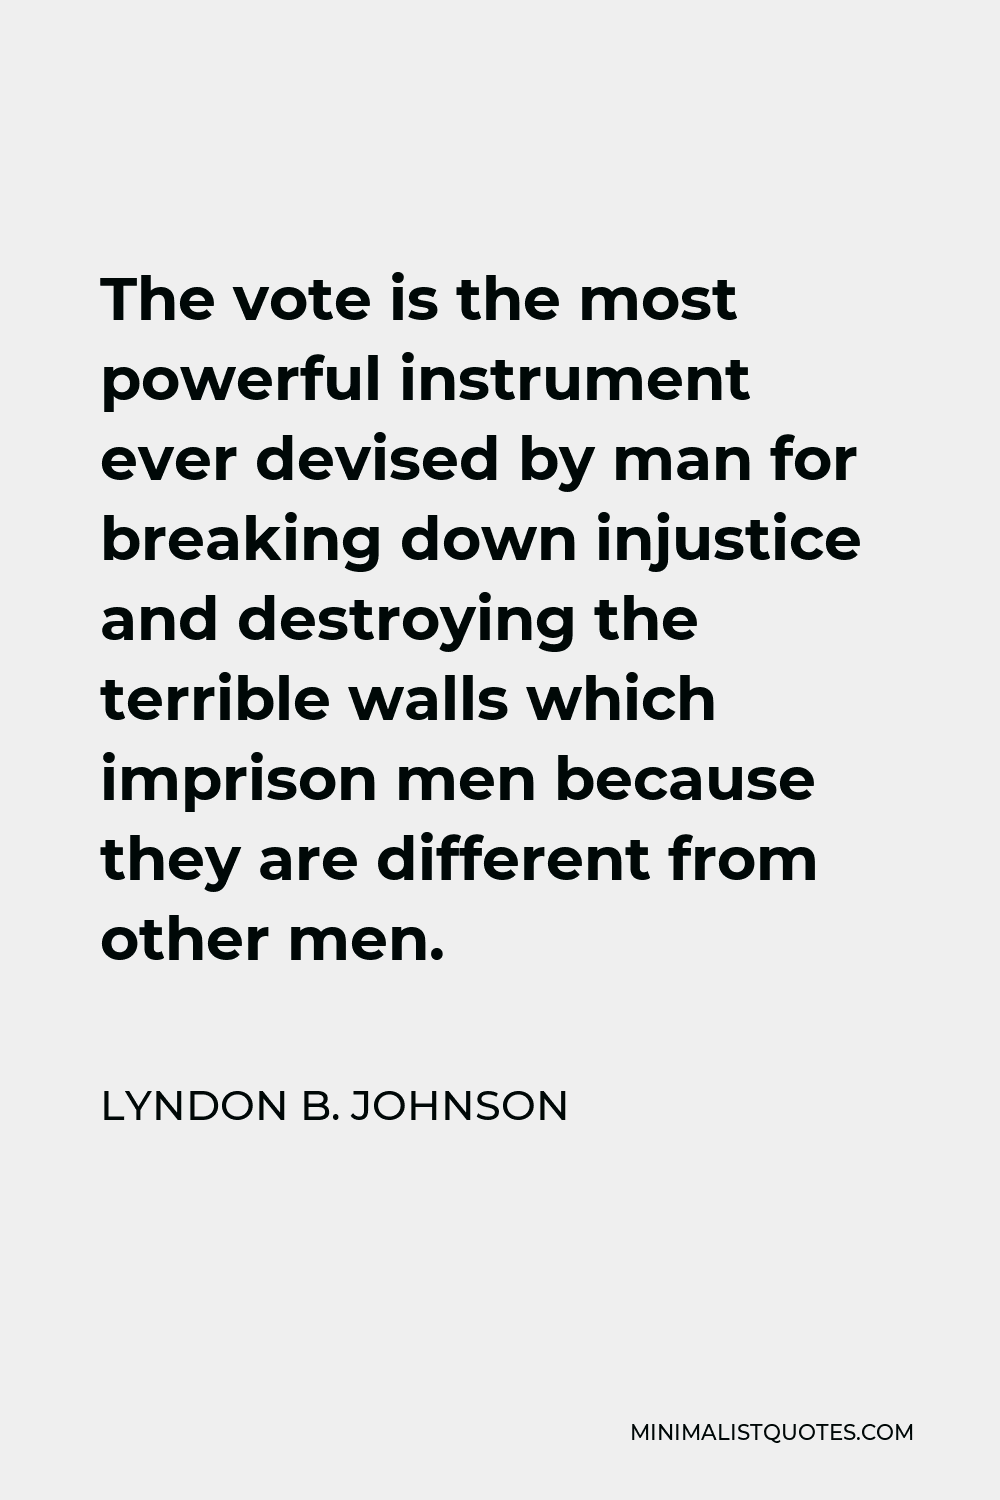 Lyndon B. Johnson Quote - The vote is the most powerful instrument ever devised by man for breaking down injustice and destroying the terrible walls which imprison men because they are different from other men.